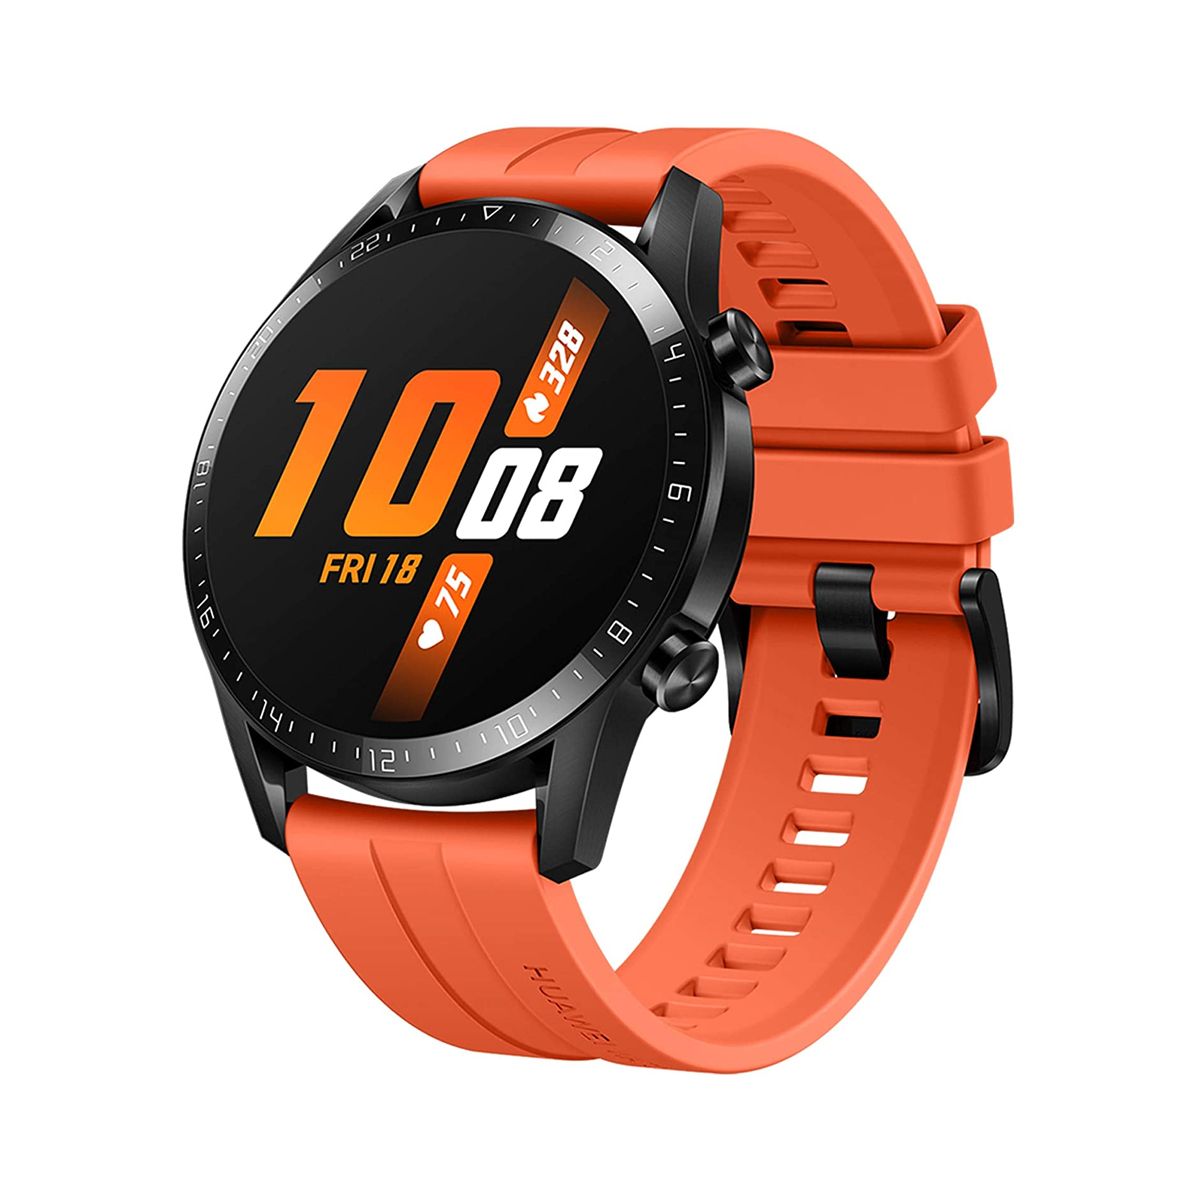 Smartwatch Huawei GT 2 Sport, Touch, Bluetooth 4.1, Android/iOS, Naranja -  Coimprit